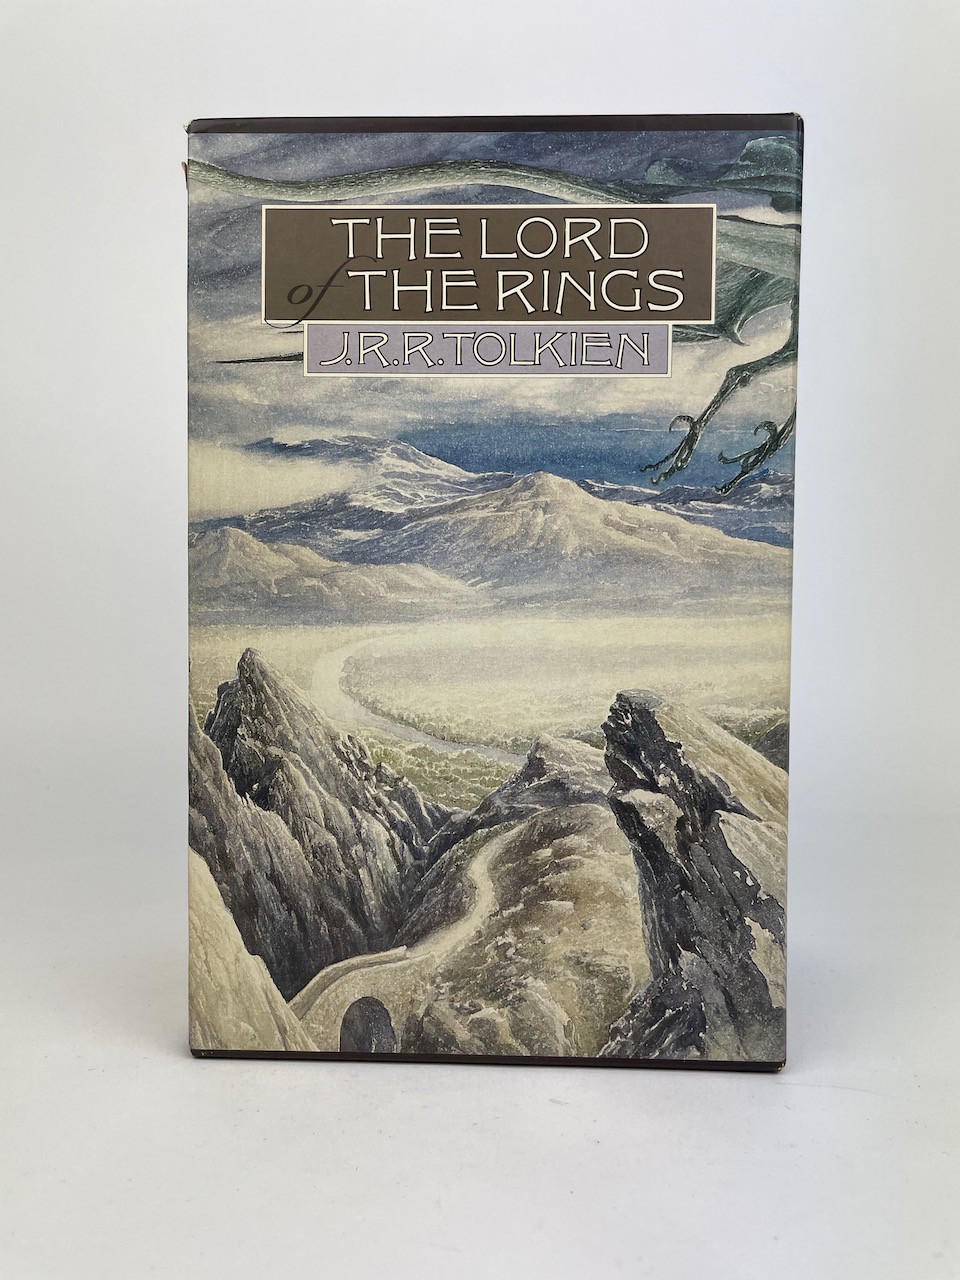 The Lord of the Rings JRR Tolkien Alan Lee set from 1988, by Houghton Mifflin 4